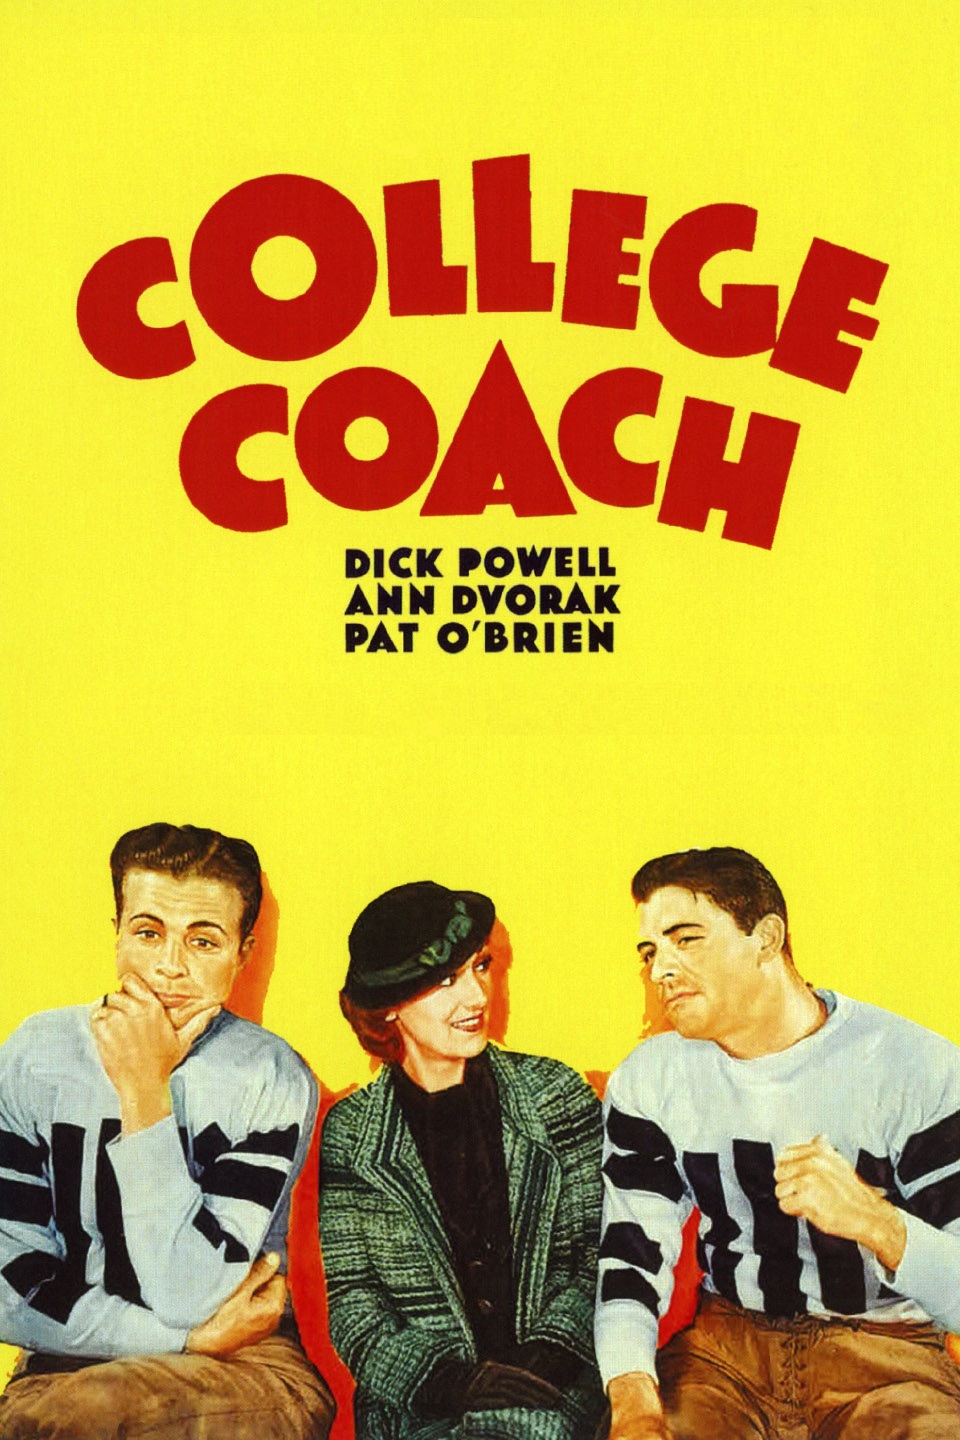 College Coach (1933) starring Dick Powell on DVD on DVD